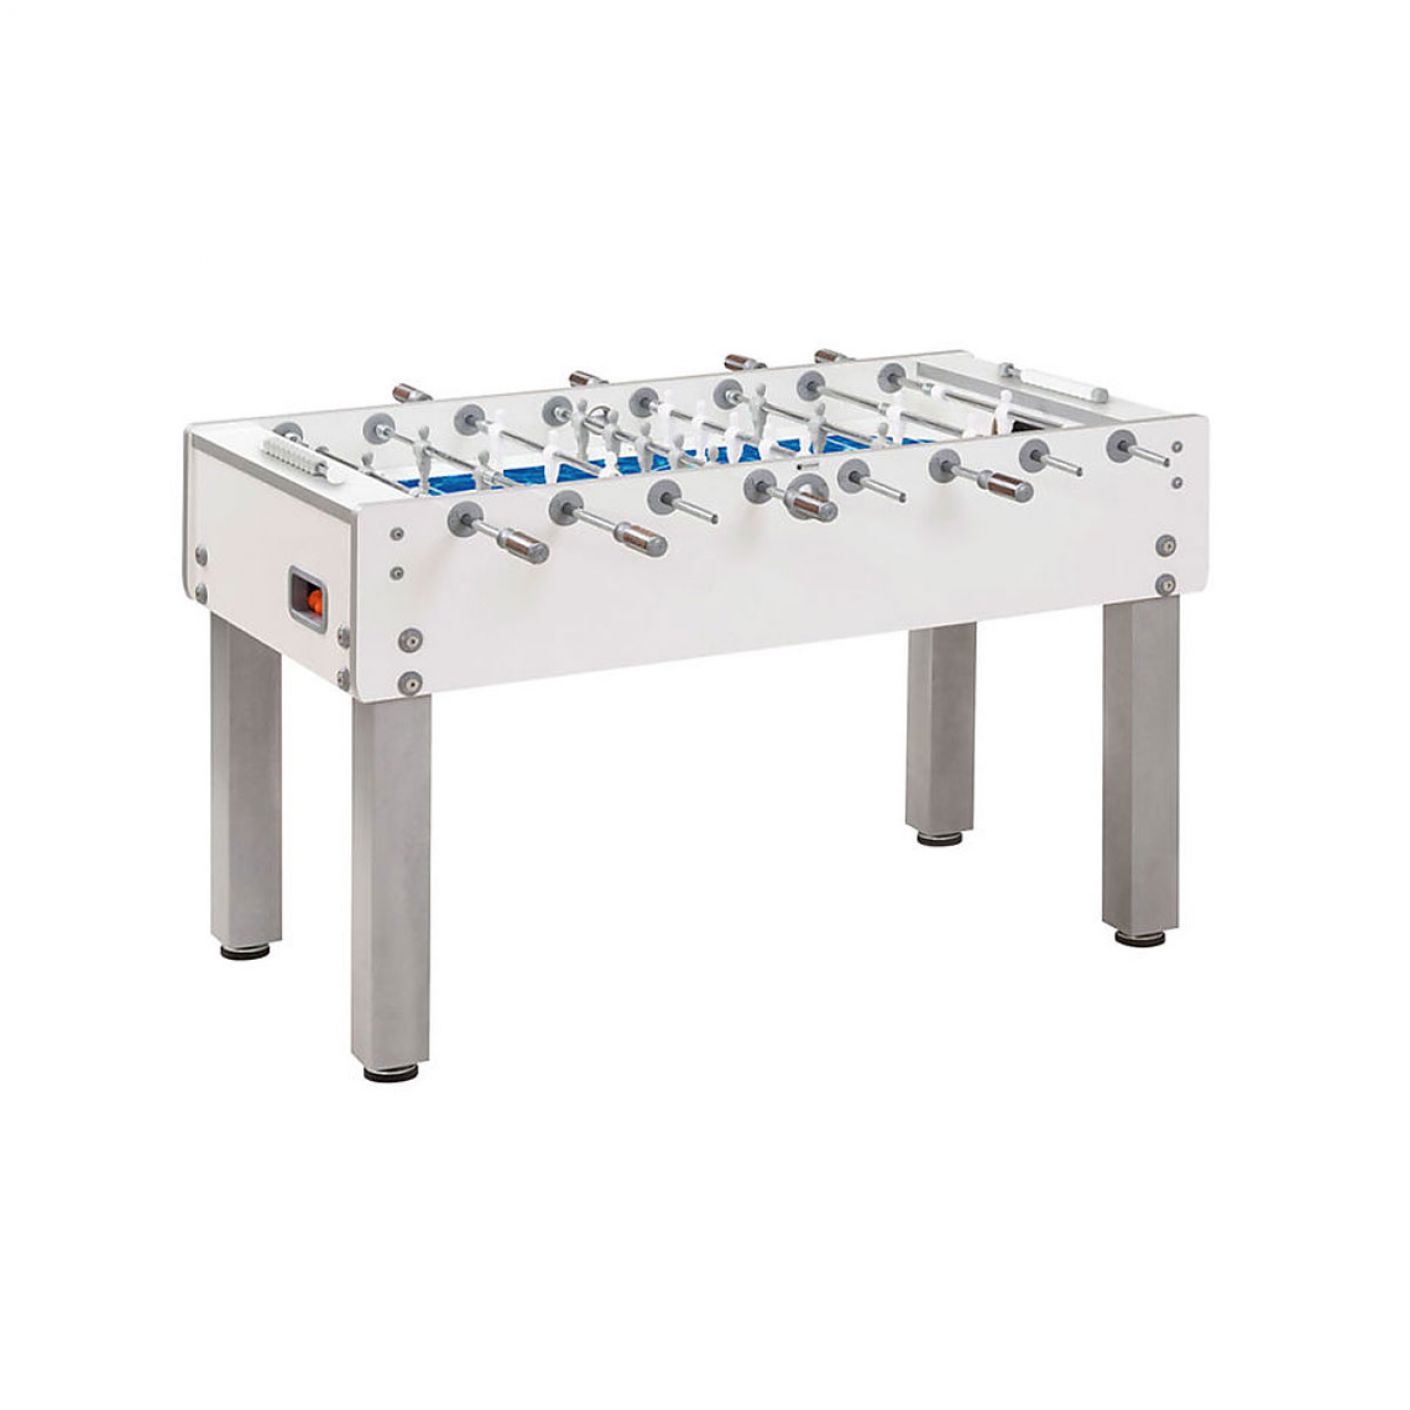 Garlando Table Football G-500 PURE WHITE H2O with retracting rods